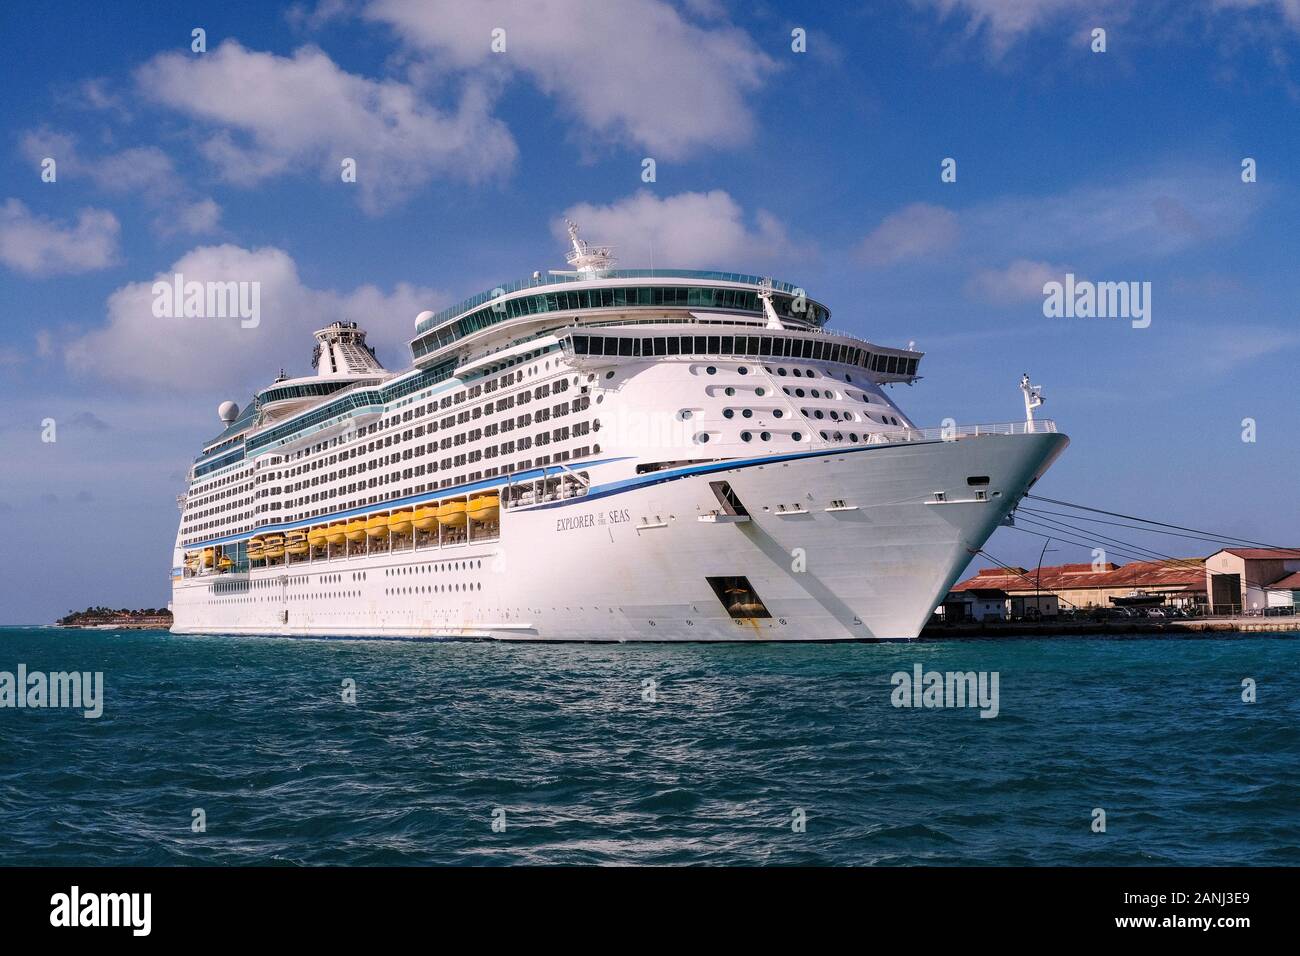 The Royal Caribbean International, Voyager Class, Explorer of the Seas cruise liner moored in Aruba in the Dutch Caribbean. Stock Photo